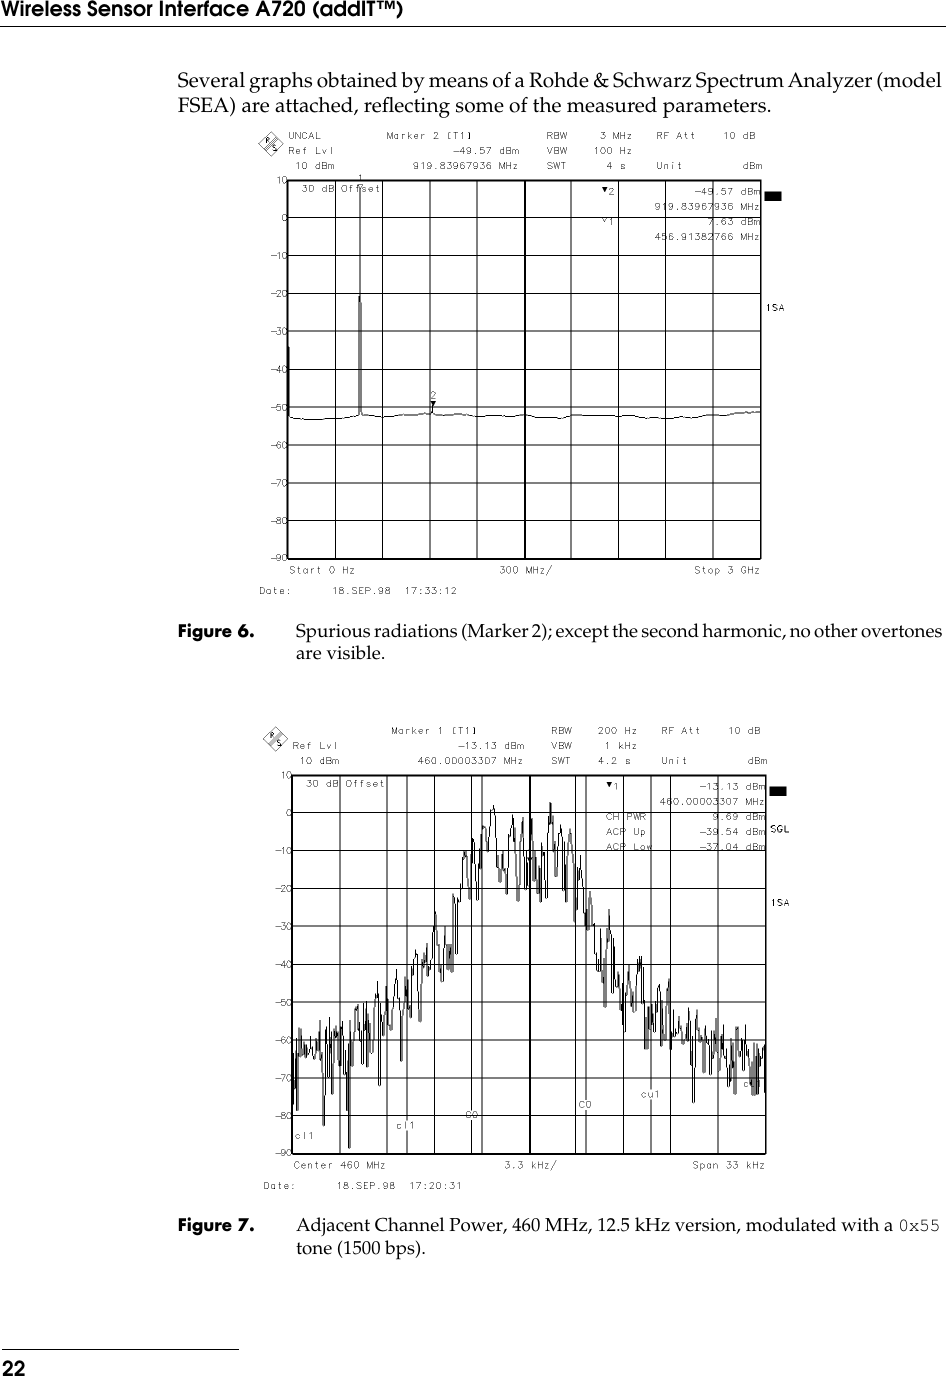 22Wireless Sensor Interface A720 (addIT™)Several graphs obtained by means of a Rohde &amp; Schwarz Spectrum Analyzer (model FSEA) are attached, reﬂecting some of the measured parameters.Figure 6. Spurious radiations (Marker 2); except the second harmonic, no other overtones are visible.Figure 7. Adjacent Channel Power, 460 MHz, 12.5 kHz version, modulated with a 0x55 tone (1500 bps).